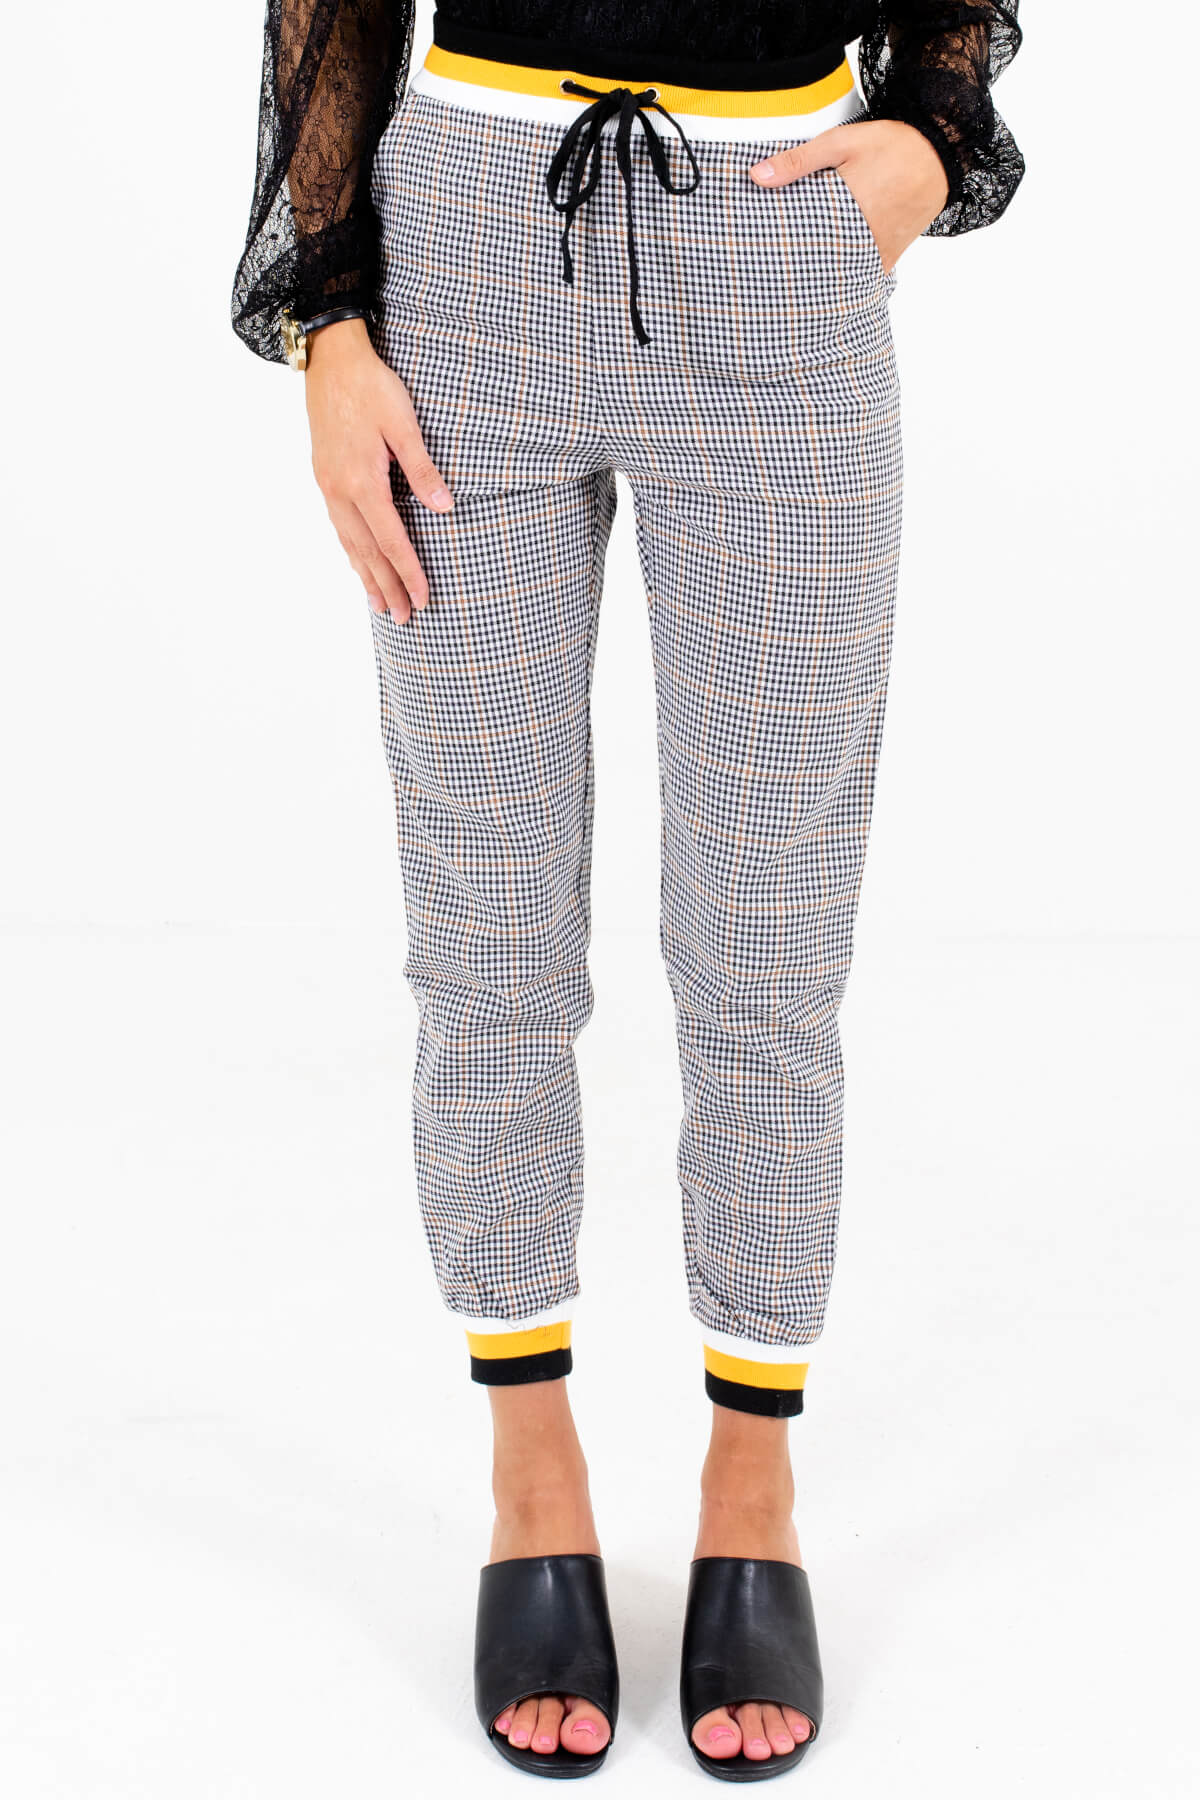 Black White and Yellow Plaid Patterned Boutique Pants for Women